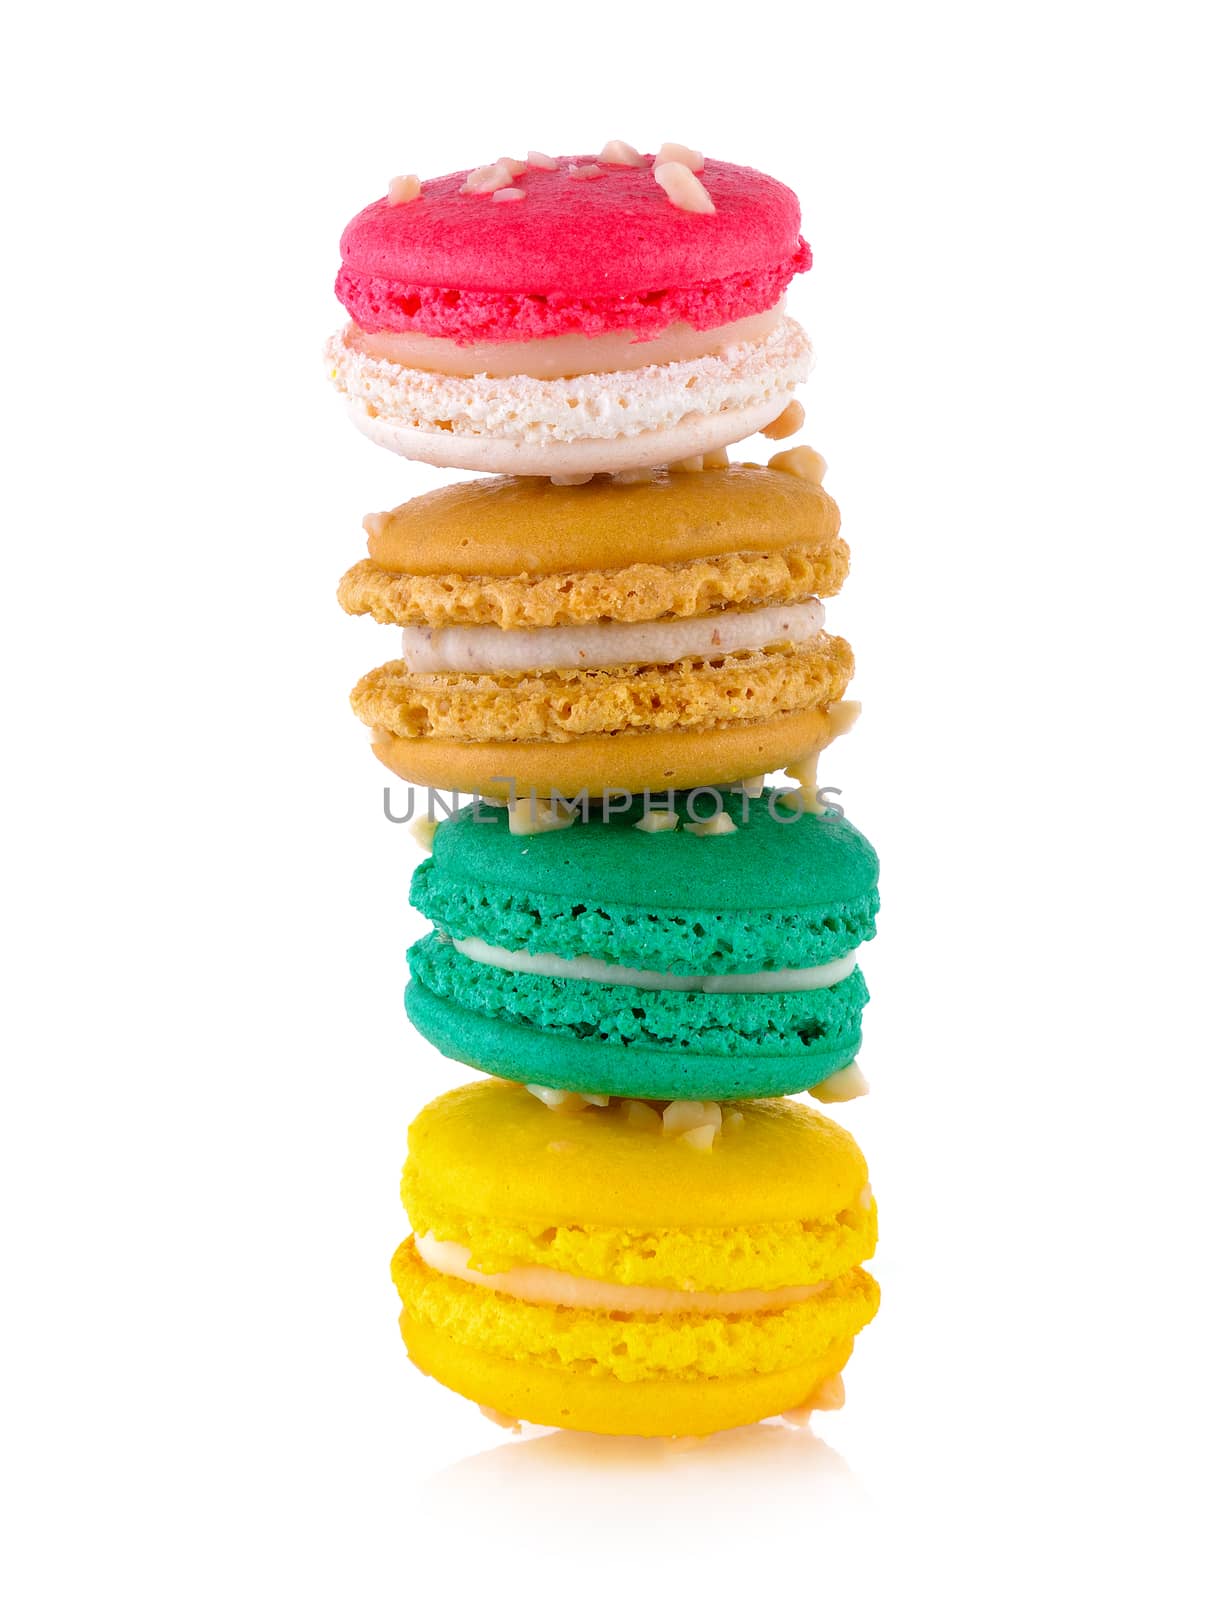  macaroons on white background by sommai